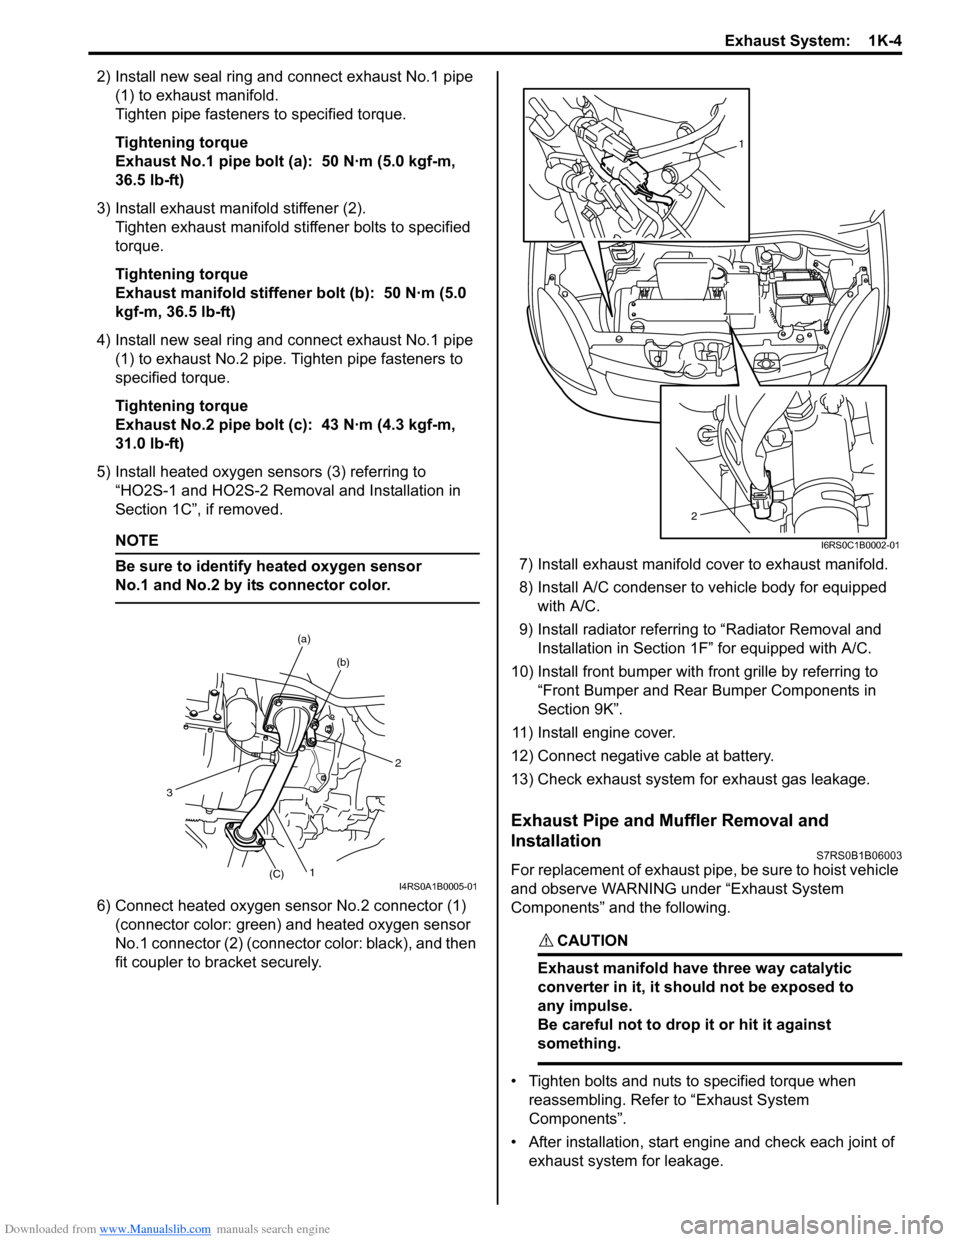 SUZUKI SWIFT 2005 2.G Service Service Manual Downloaded from www.Manualslib.com manuals search engine Exhaust System:  1K-4
2) Install new seal ring and connect exhaust No.1 pipe (1) to exhaust manifold.
Tighten pipe fasteners to specified torqu